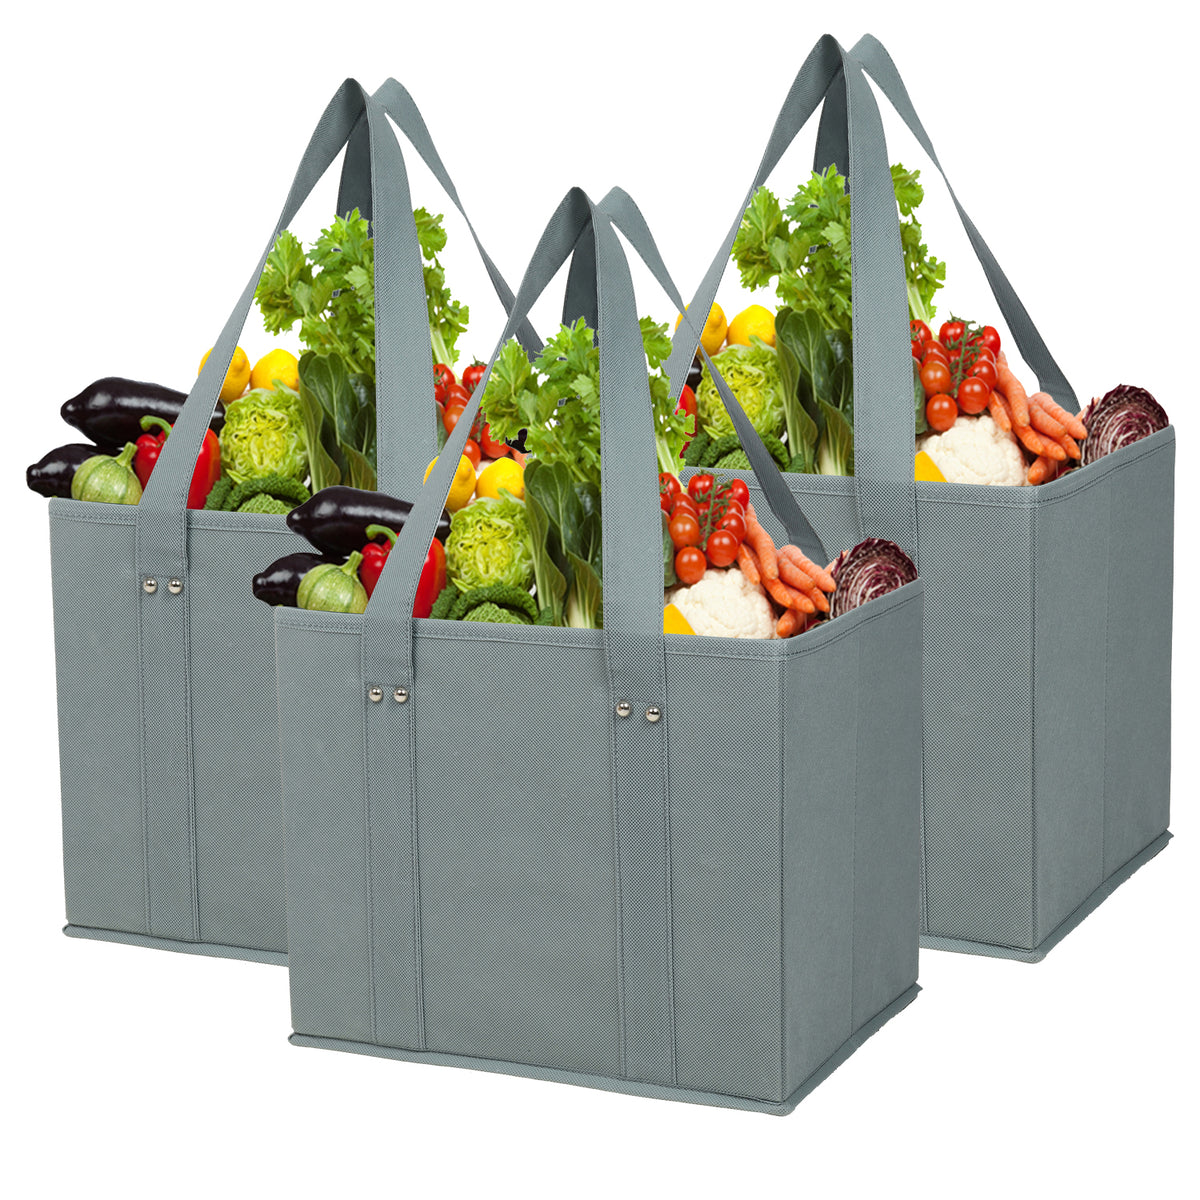 Reusable Grocery Shopping Bags Boxes Totes Foldable Heavy Duty Water Resistant Collapsible Storage Box Baskets Pack of 3